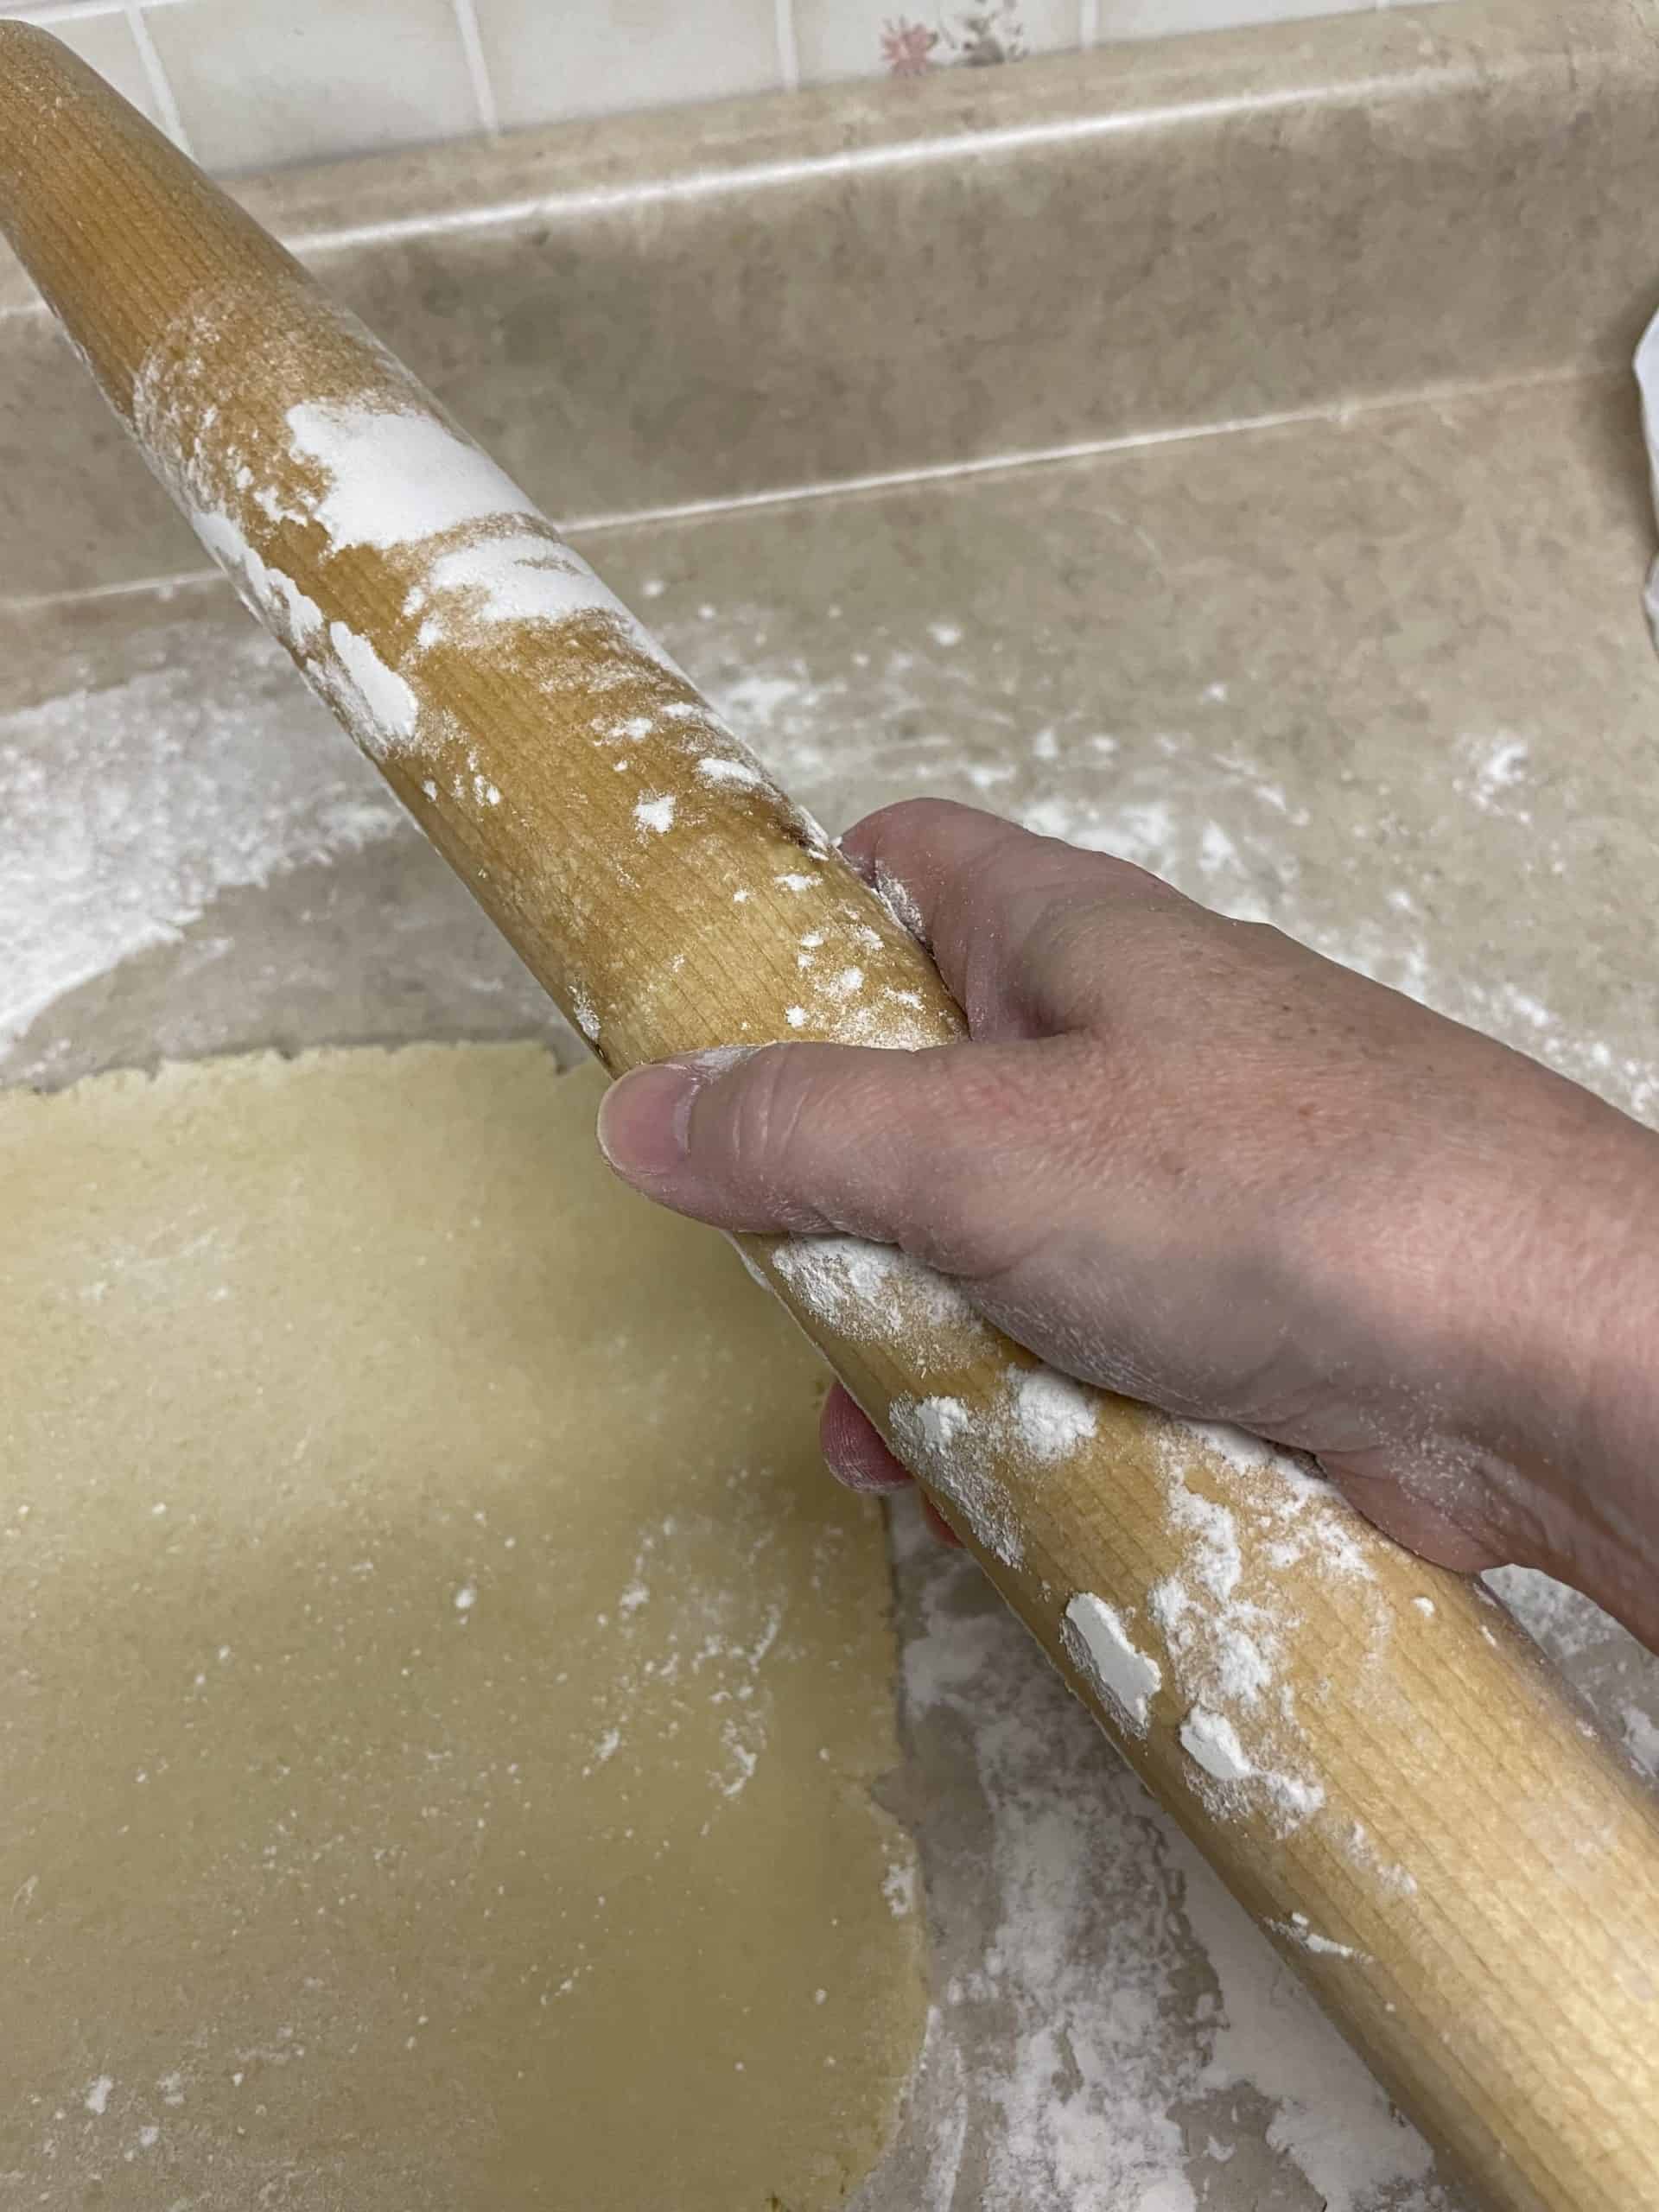 Re-flour the rolling pin and sugar cookie dough when needed.